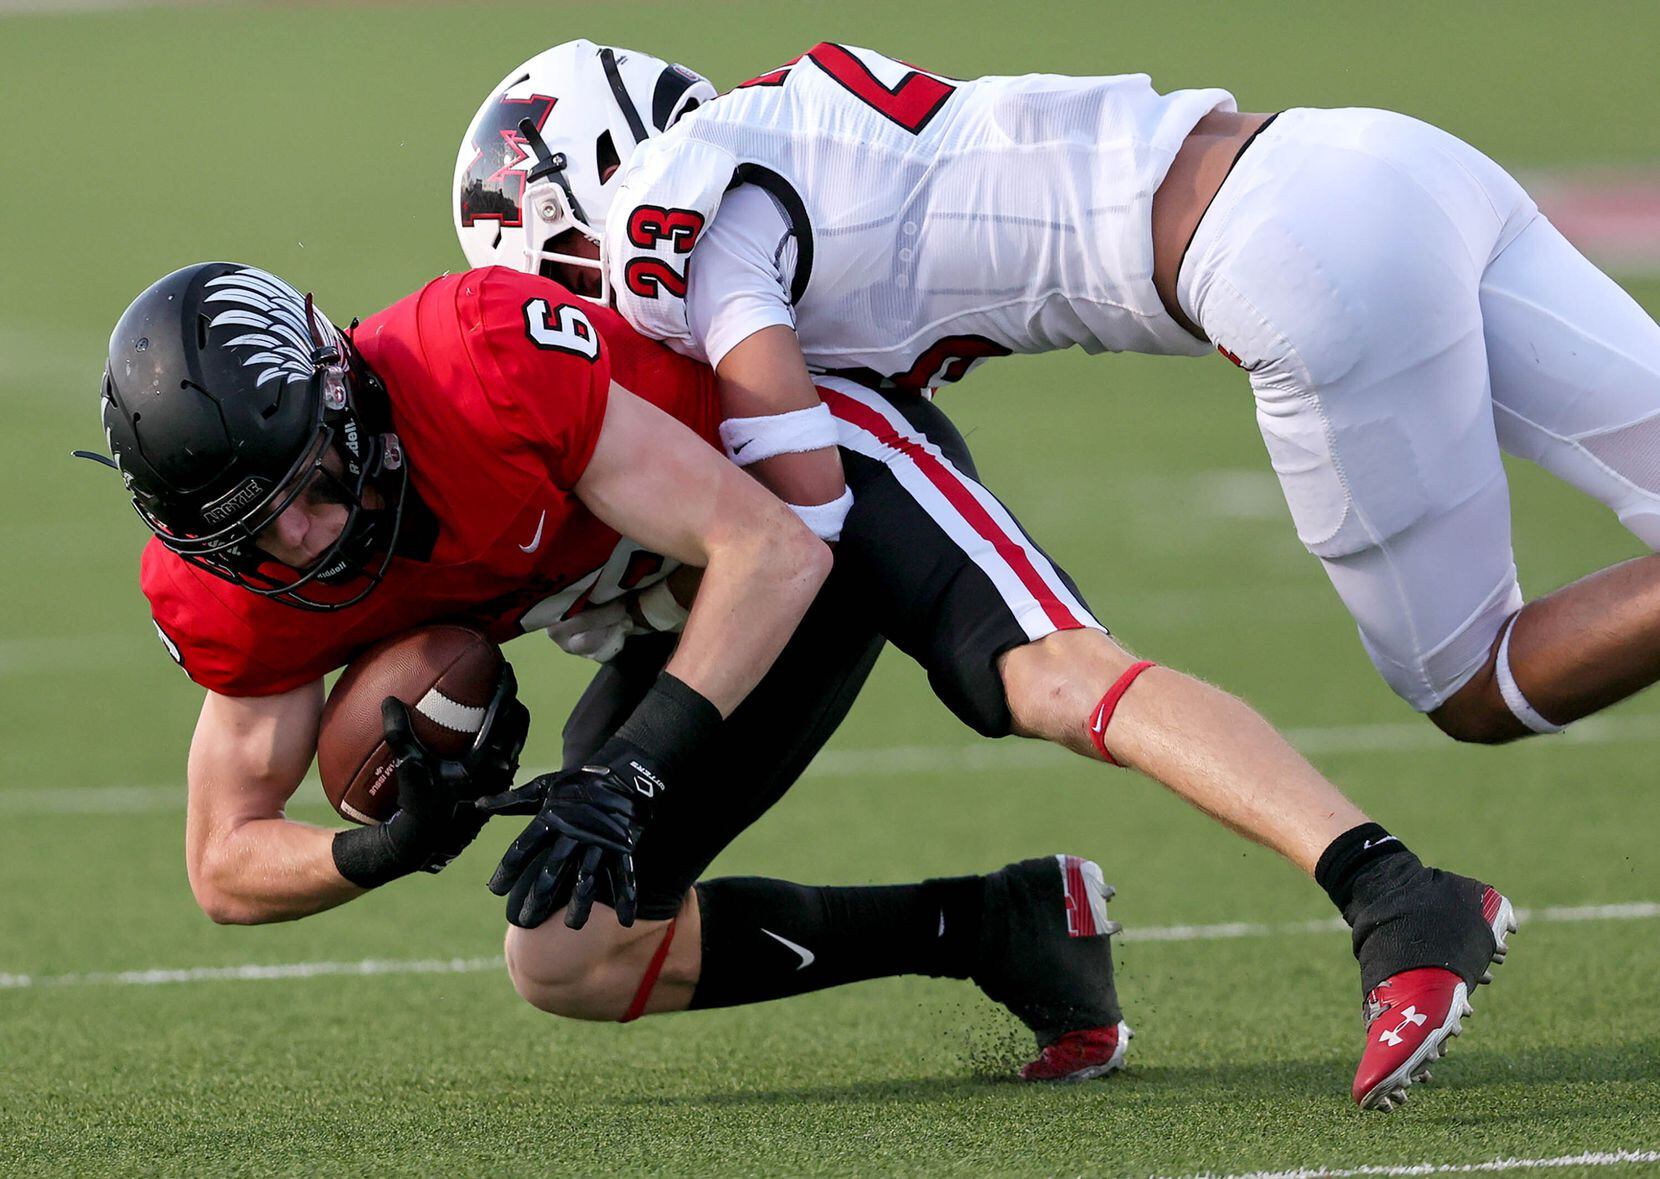 Argyle's Lane Stewart (6) is stopped for a short gain by Melissa's Josh Nicholas (23) during...